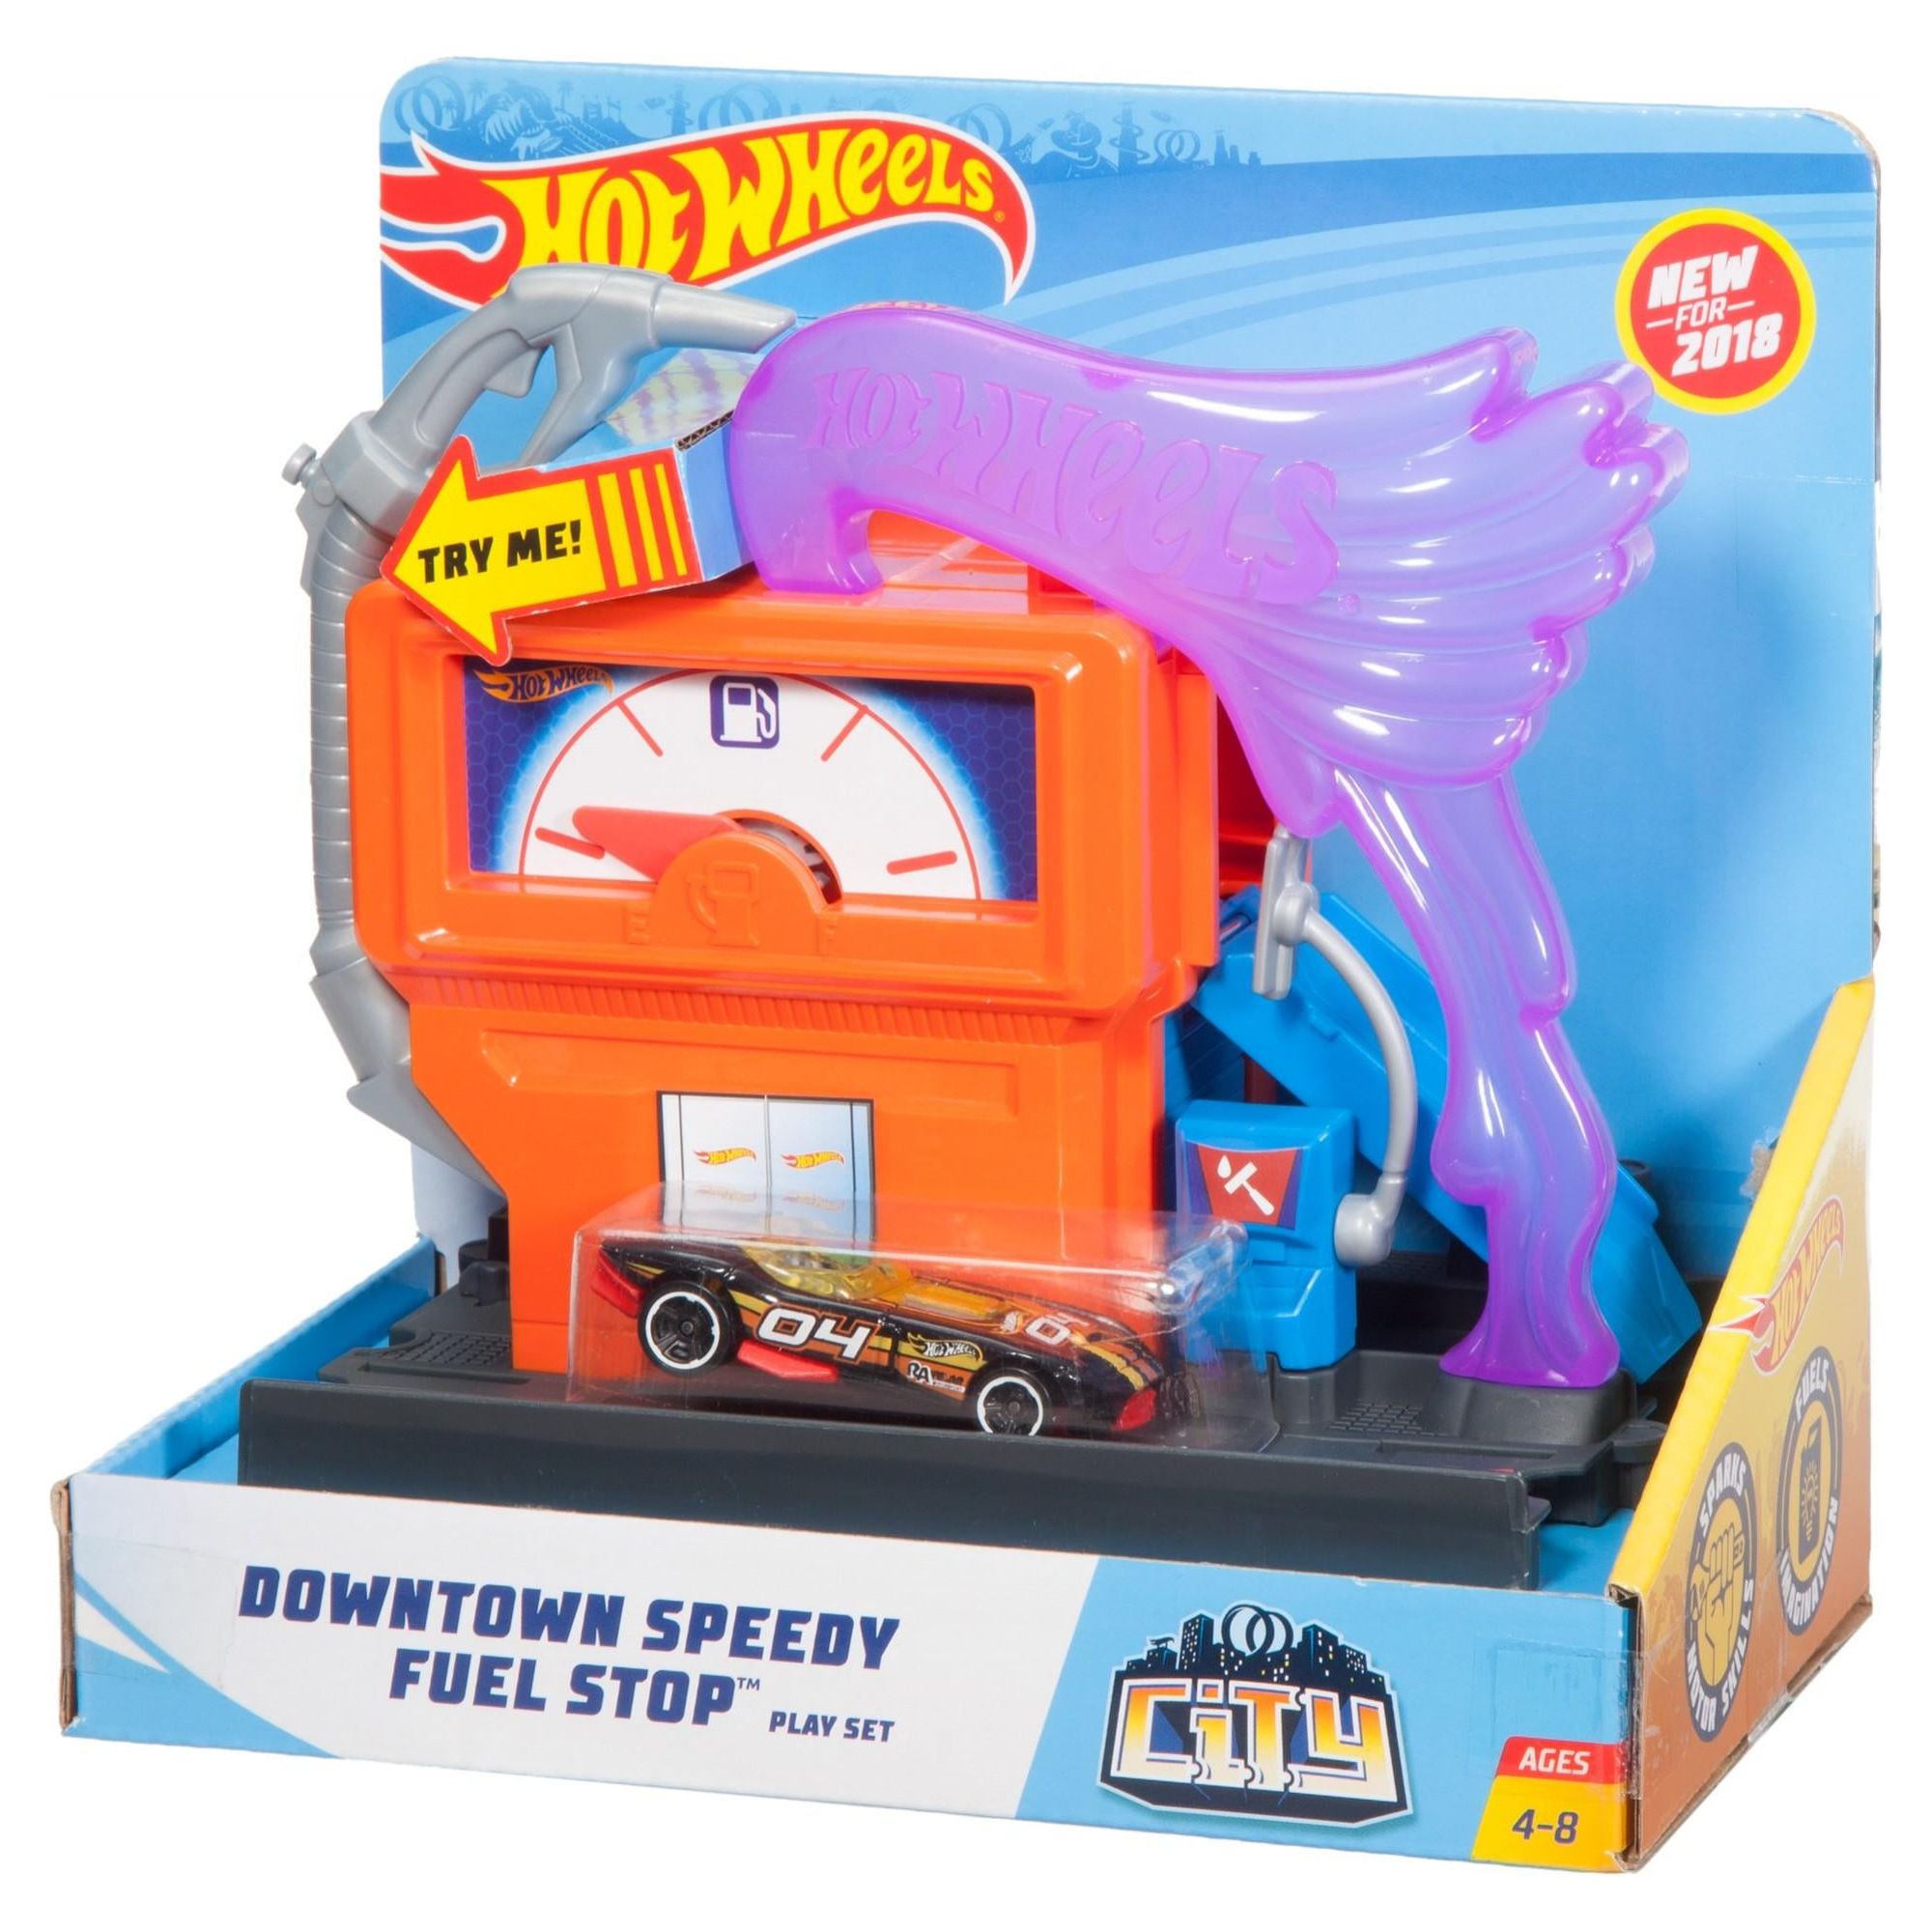 Hot Wheels City Downtown Super Fuel Stop Play Set - image 4 of 5